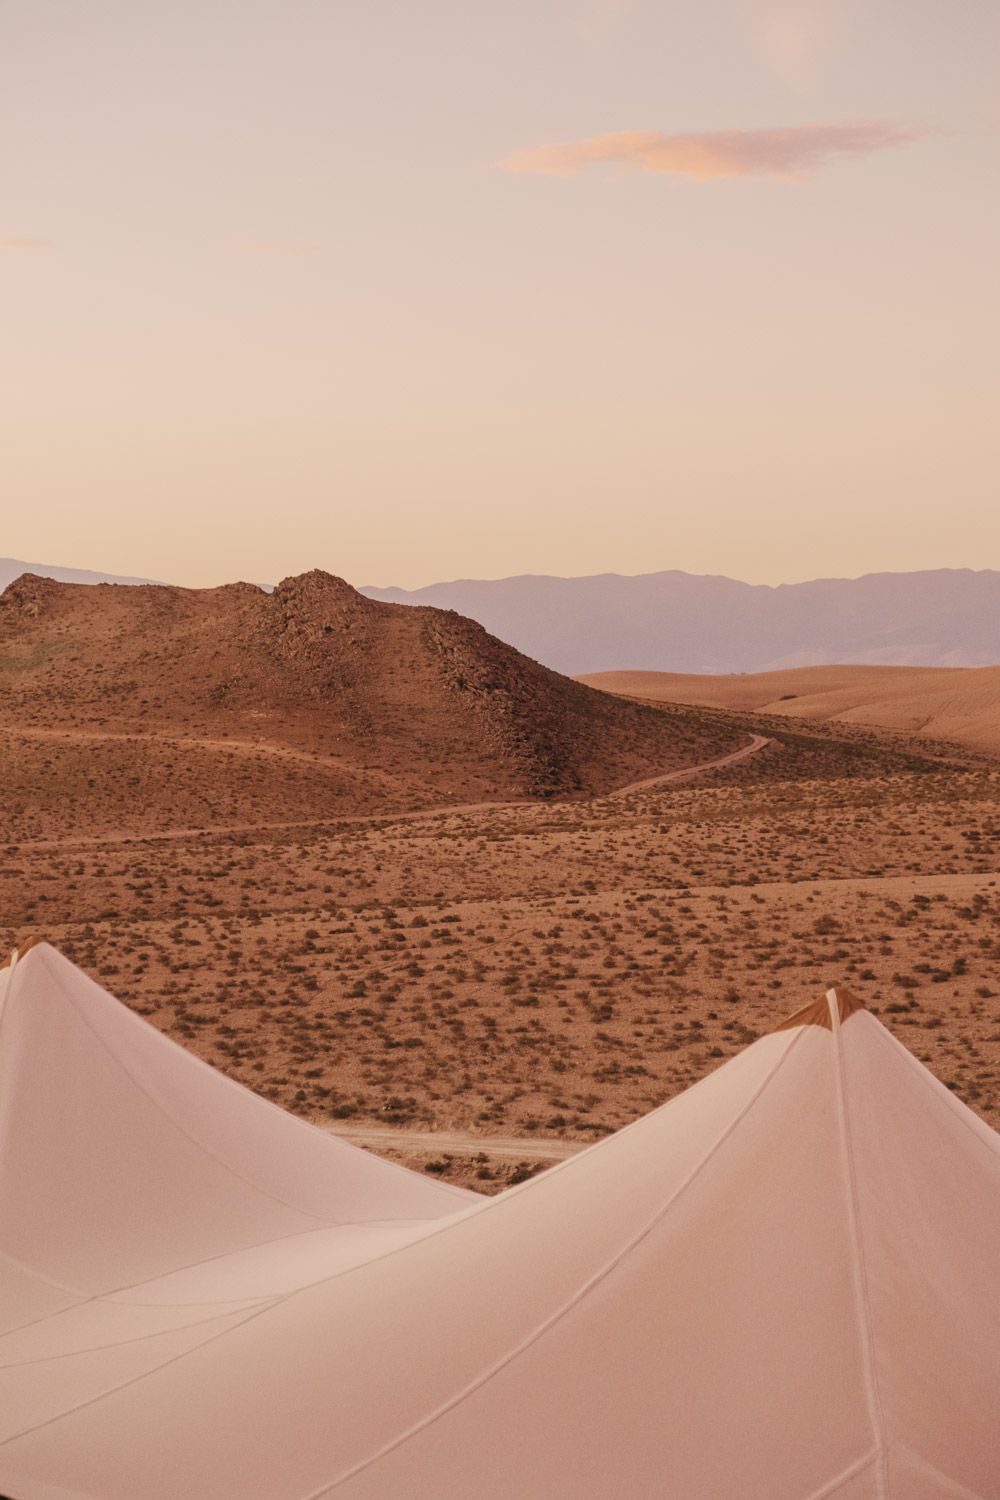 sunrise view of the camp and desert at scarabeo camp